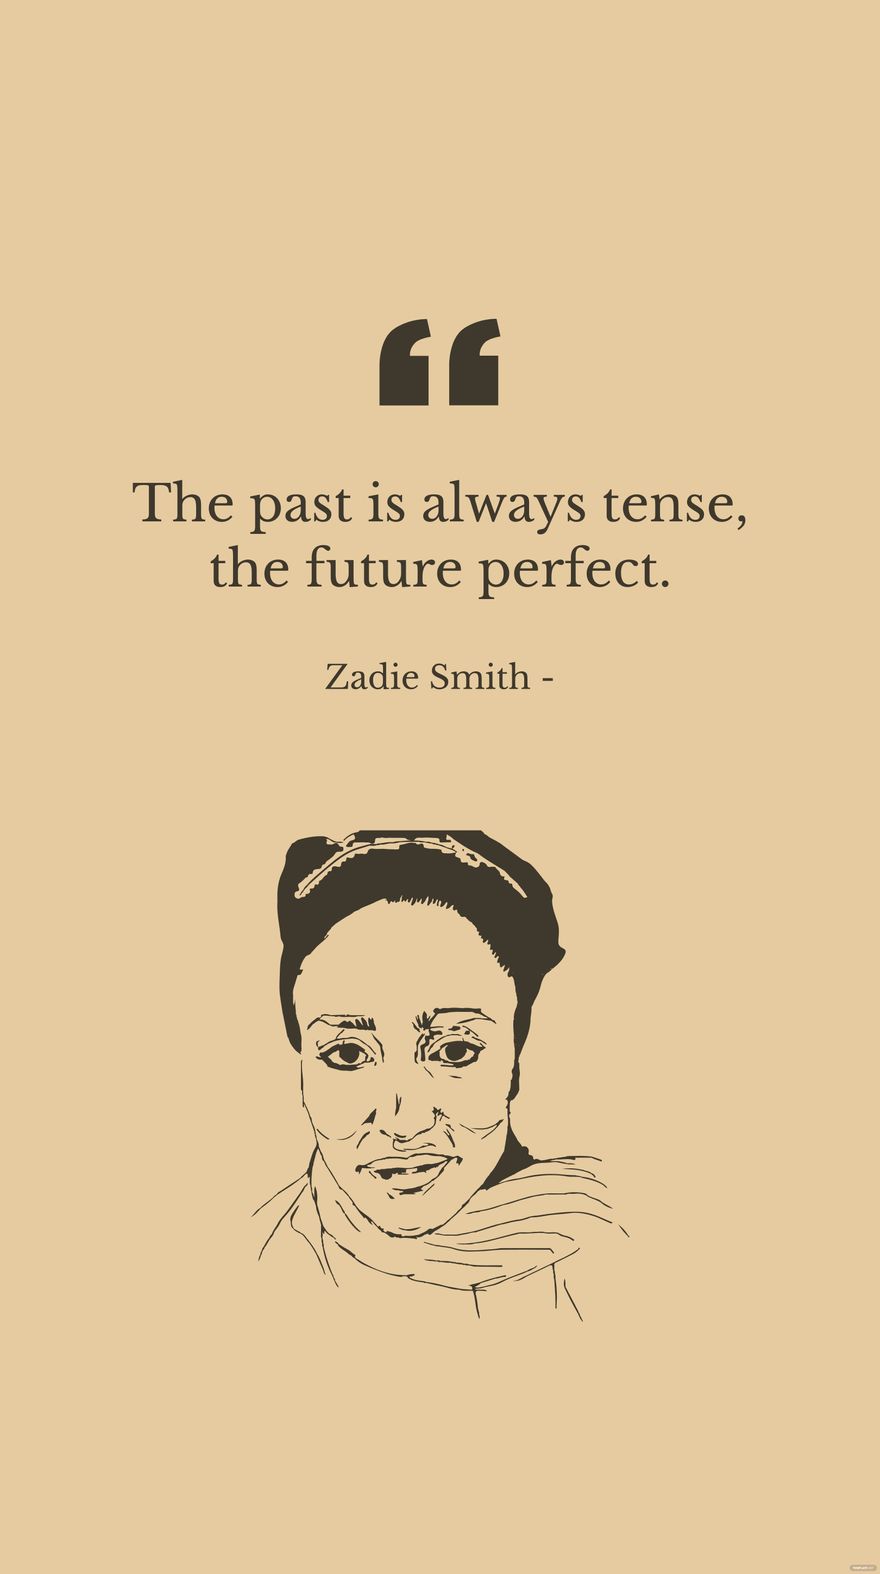 Zadie Smith - The past is always tense, the future perfect. in JPG